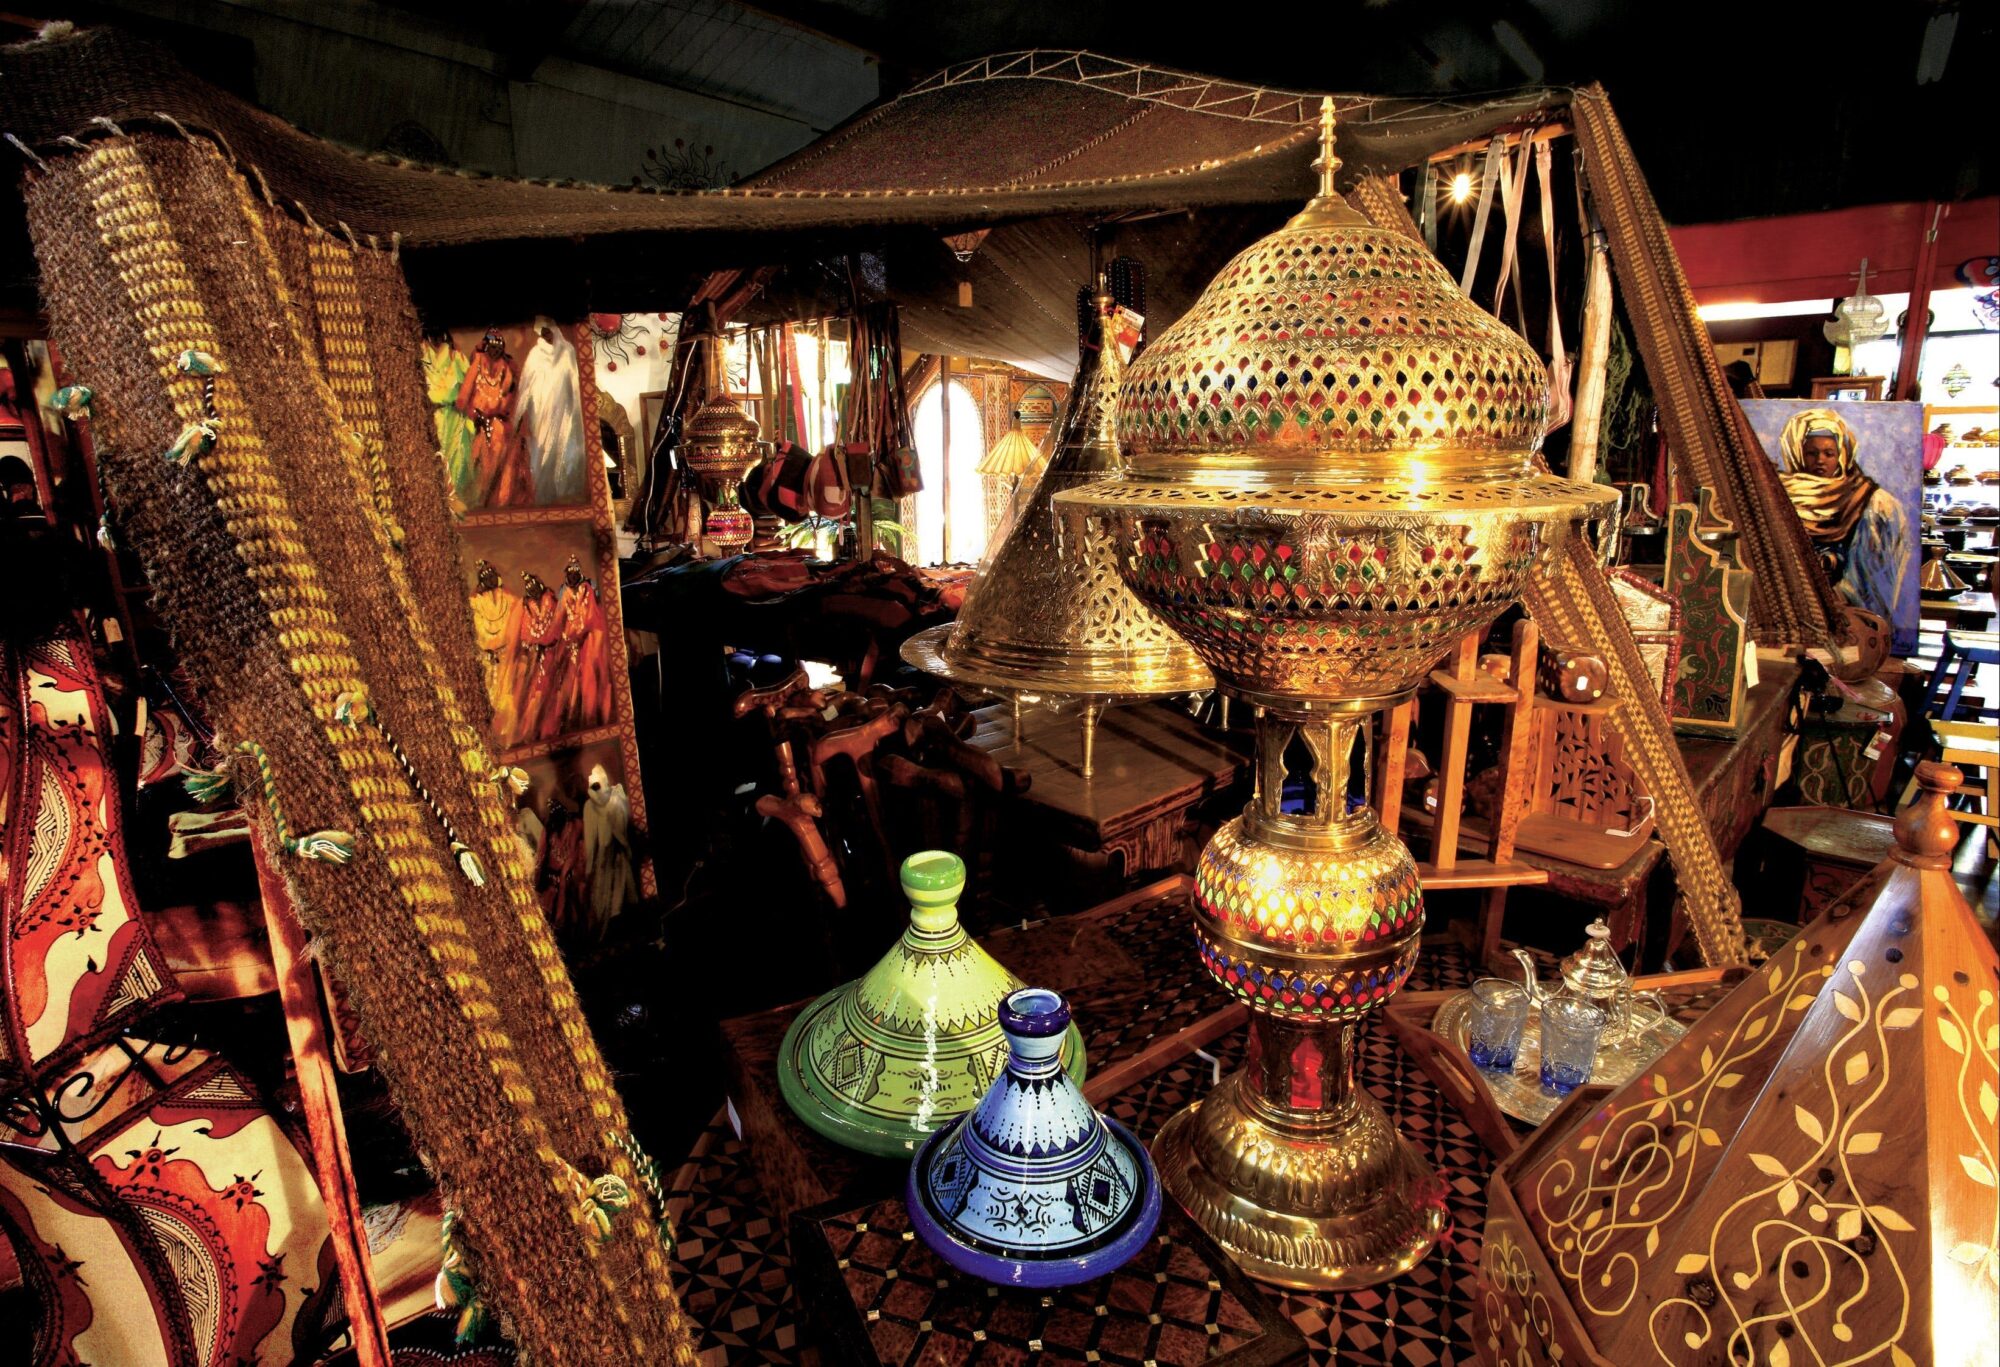 Various traditional trinkets and artistic pieces in a room with a bazaar-style appearance